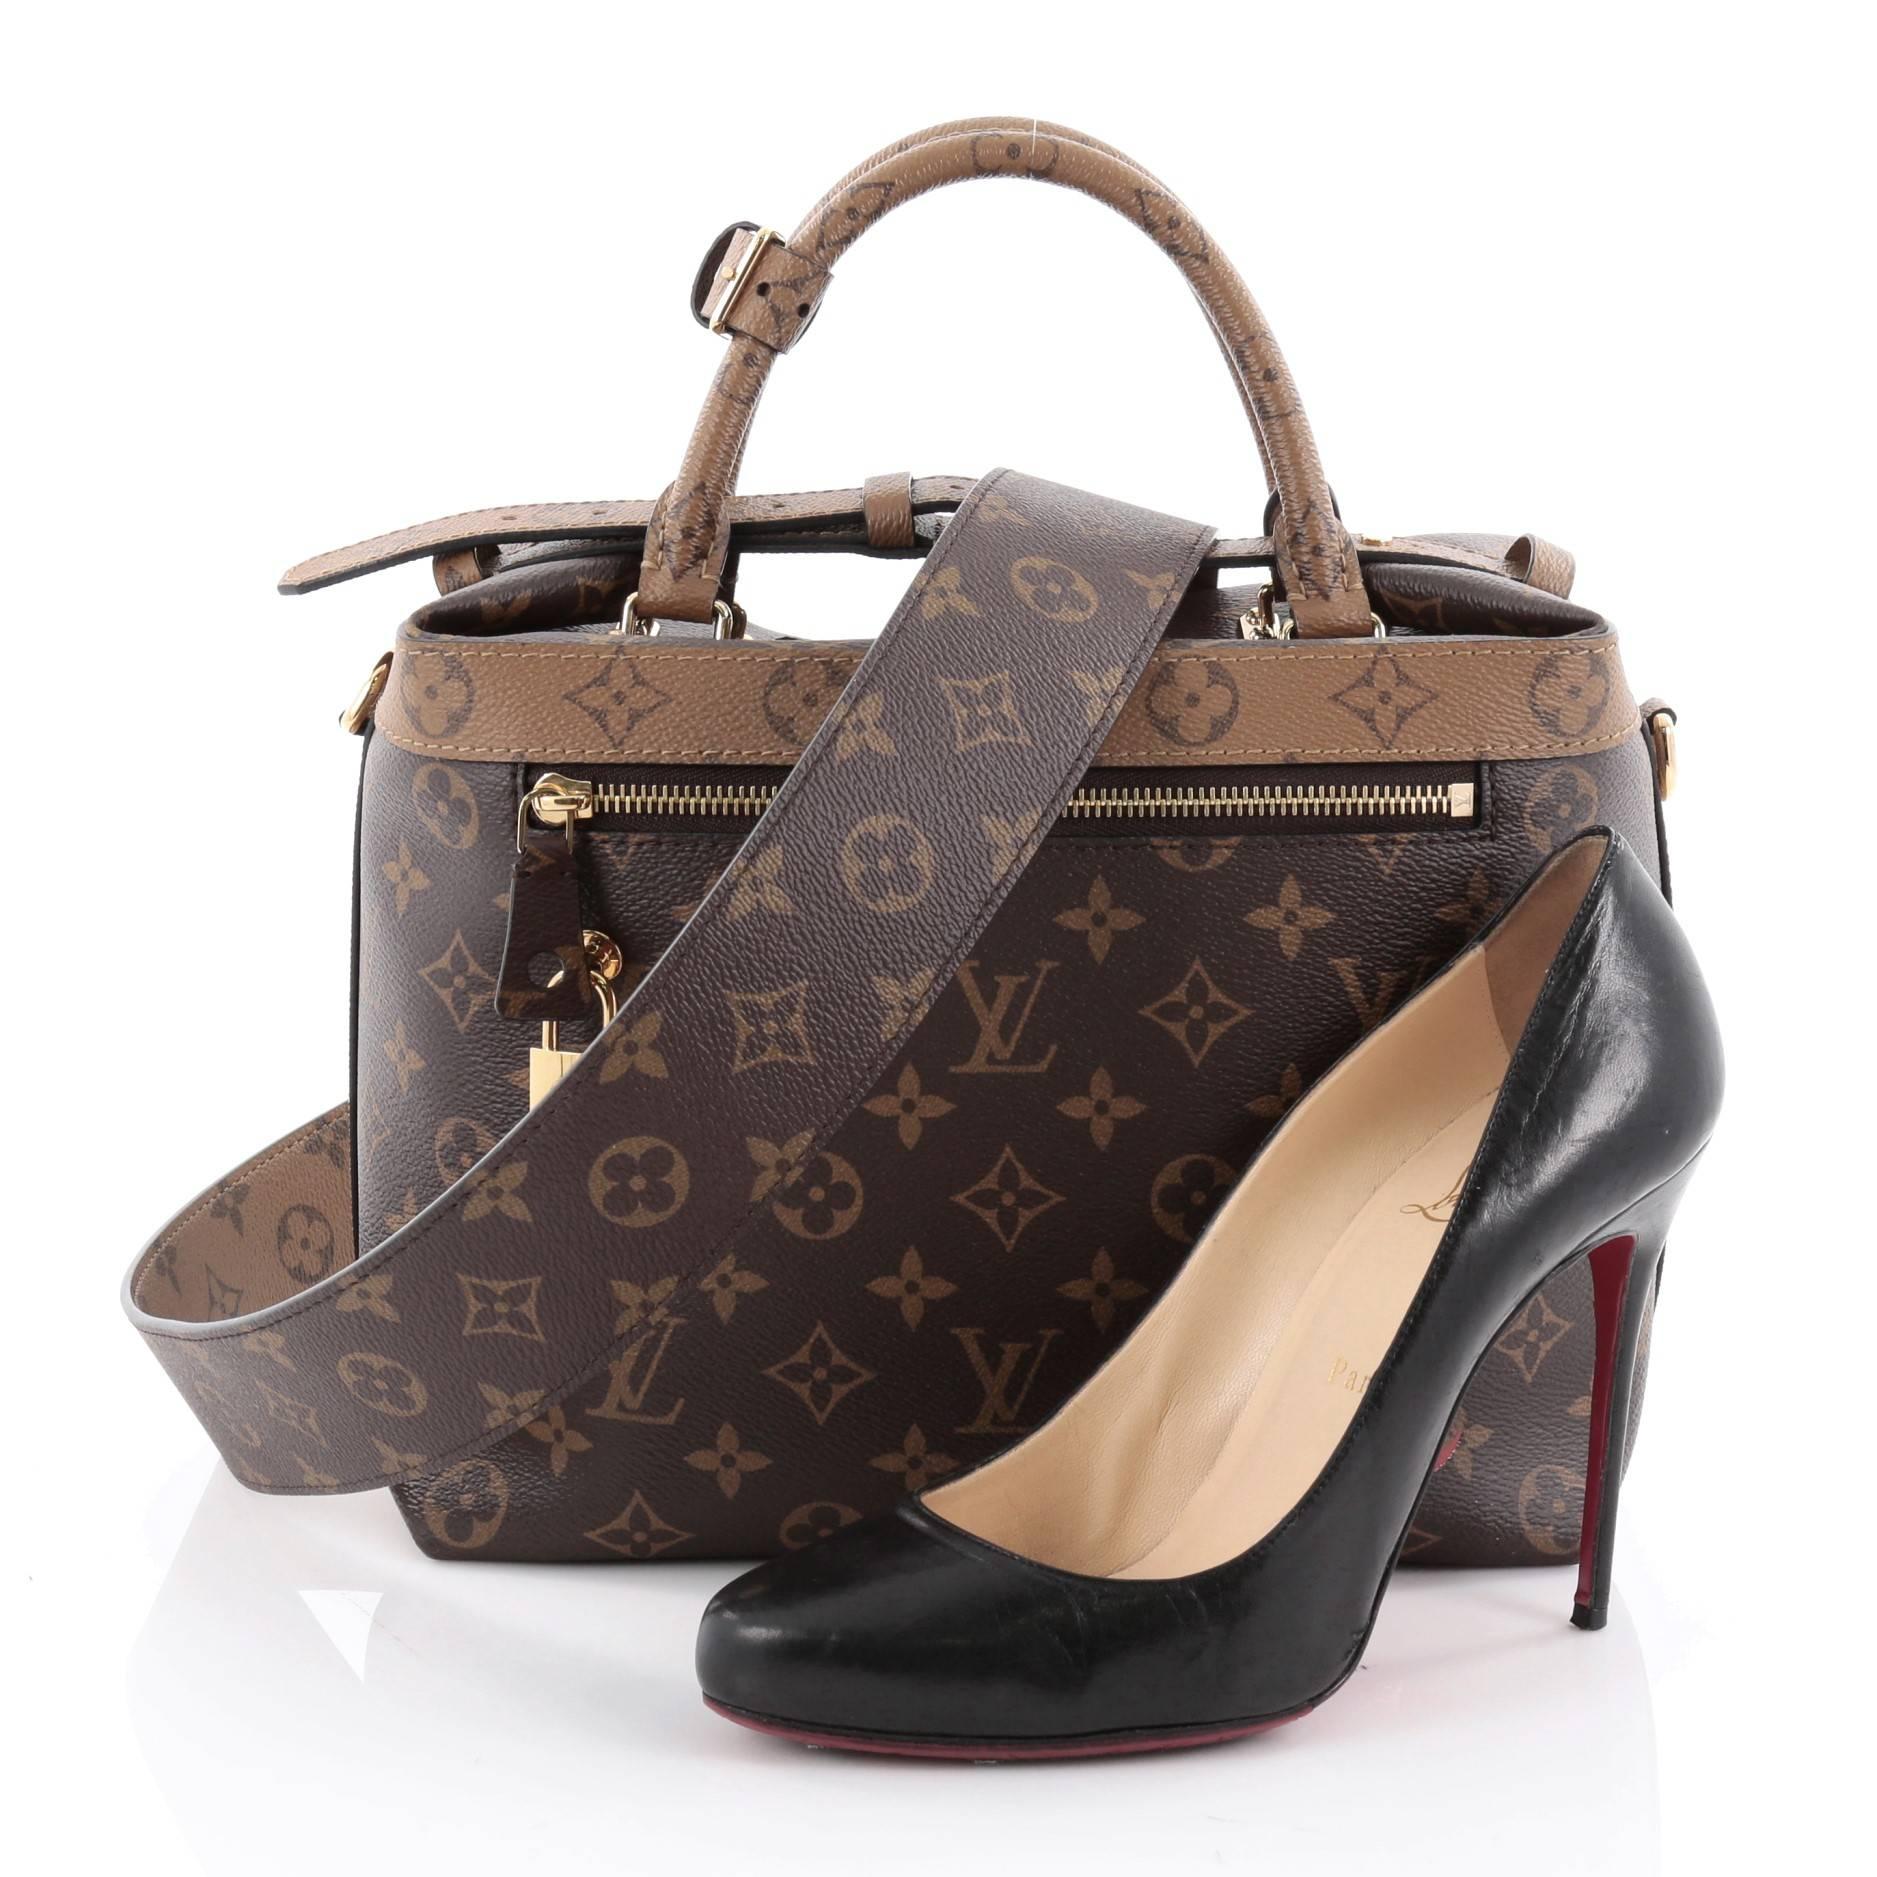 This authentic Louis Vuitton City Cruiser Handbag Reverse Monogram Canvas PM is a bag from the brands' Fall/Winter 2016 Bag Collection that takes the House’s iconic motif to a higher pedestal and twists it inside out. Crafted from brown monogram